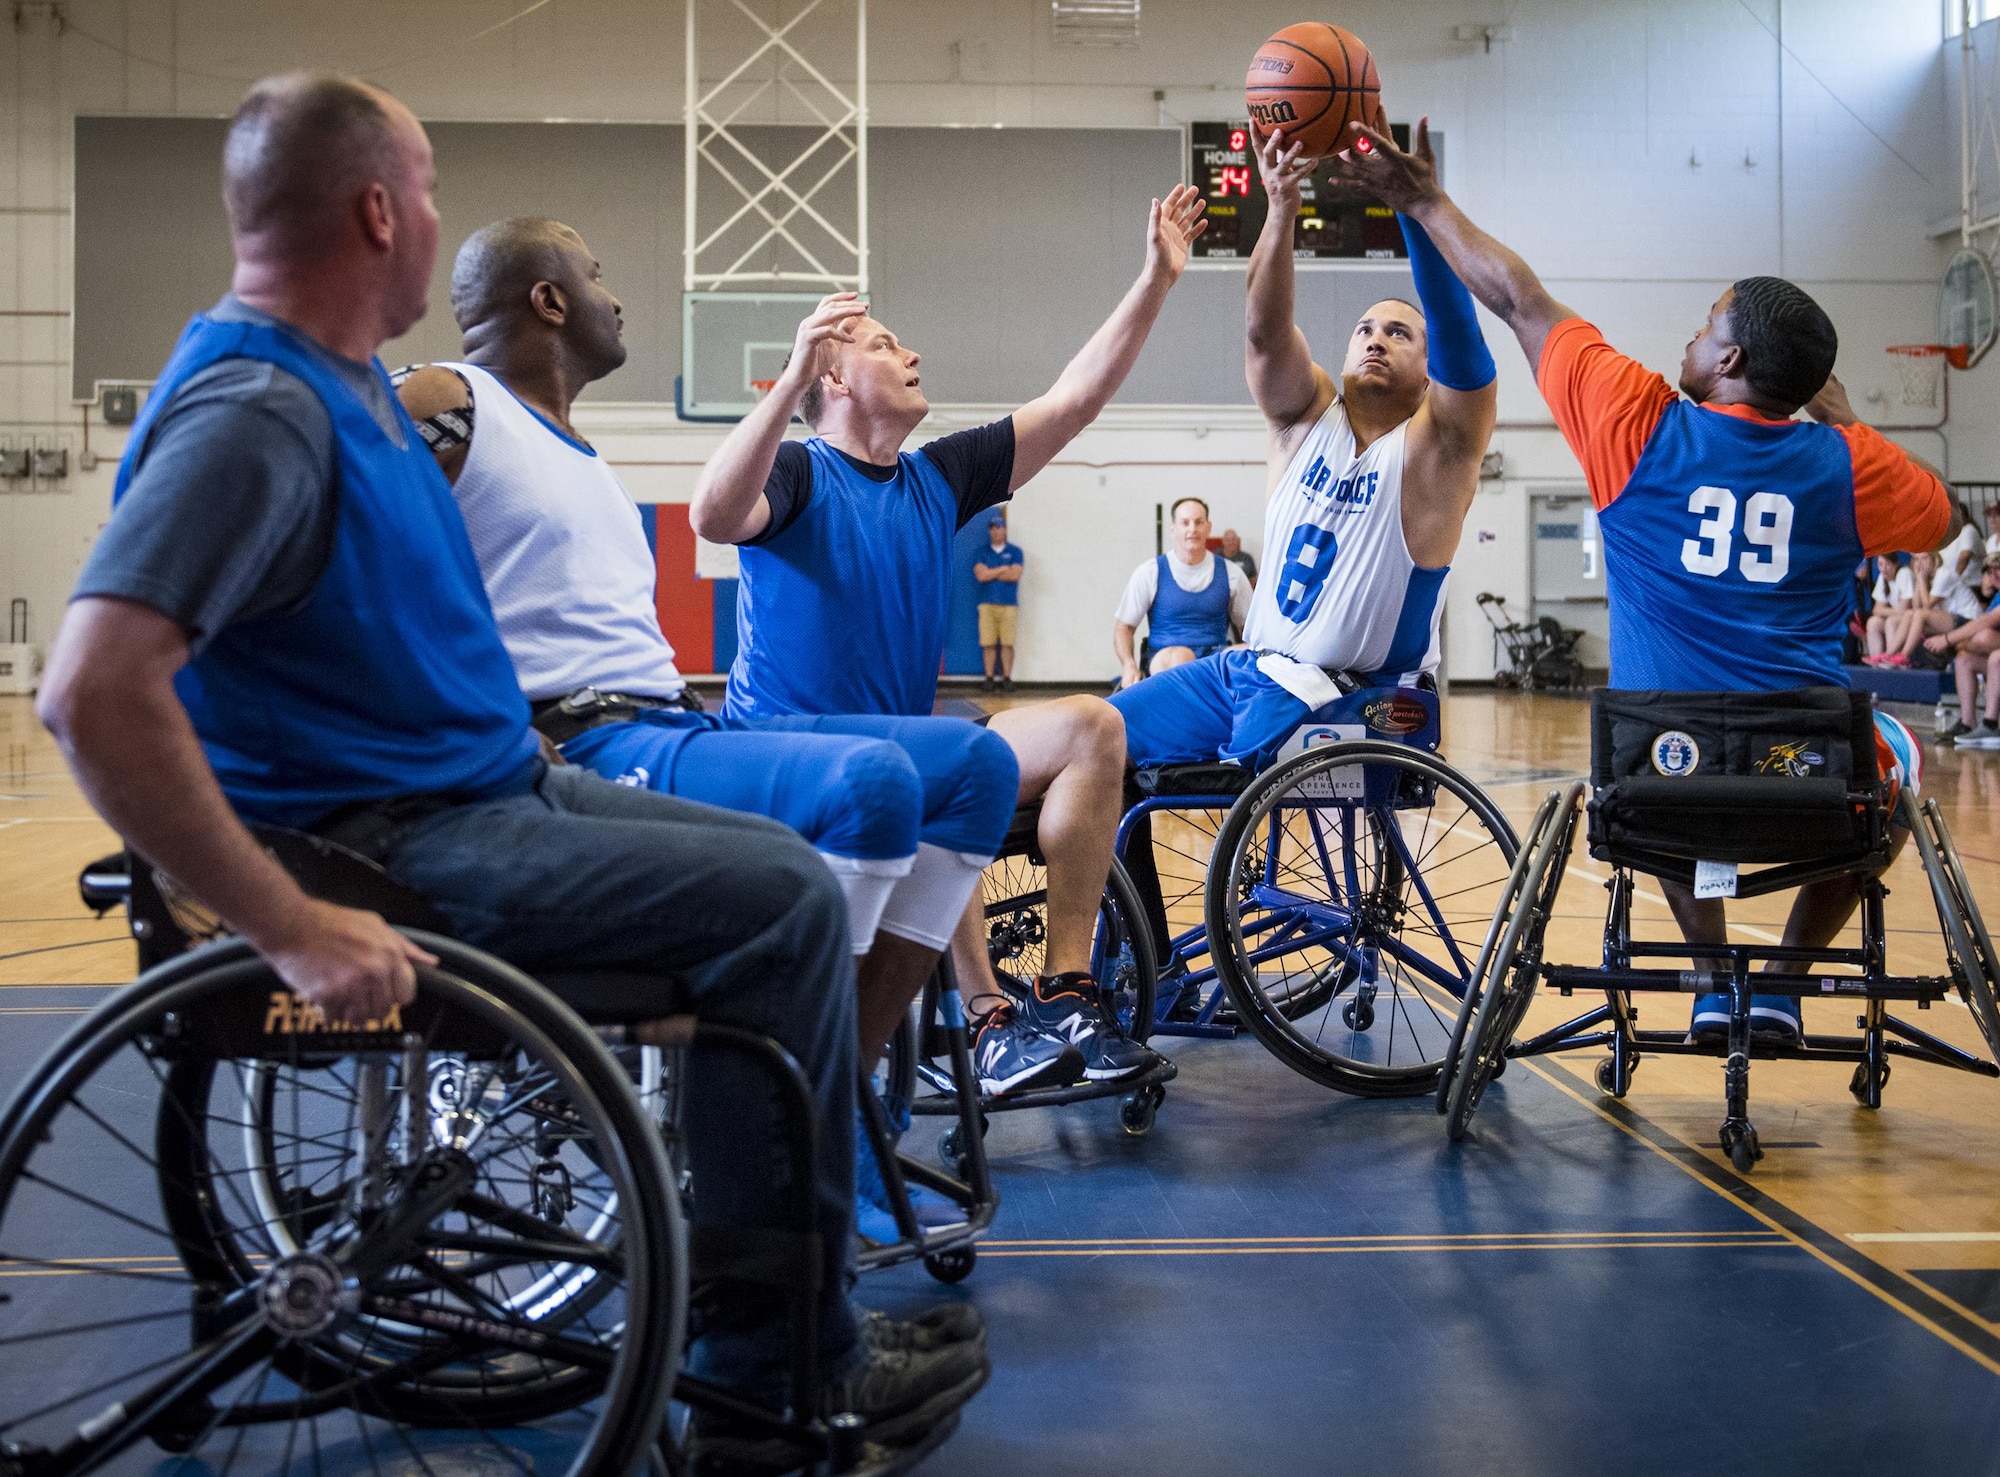 Brian Williams, an Air Force Warrior Games wheelchair basketball player, tries to hold onto the ball during a scrimmage game against base leadership on the final day of a training camp held at Eglin Air Force Base, Fla., April 28. The base-hosted, week-long Warrior Games training camp is the last team practice session before the yearly competition in June. (U.S. Air Force photo/Samuel King Jr.)